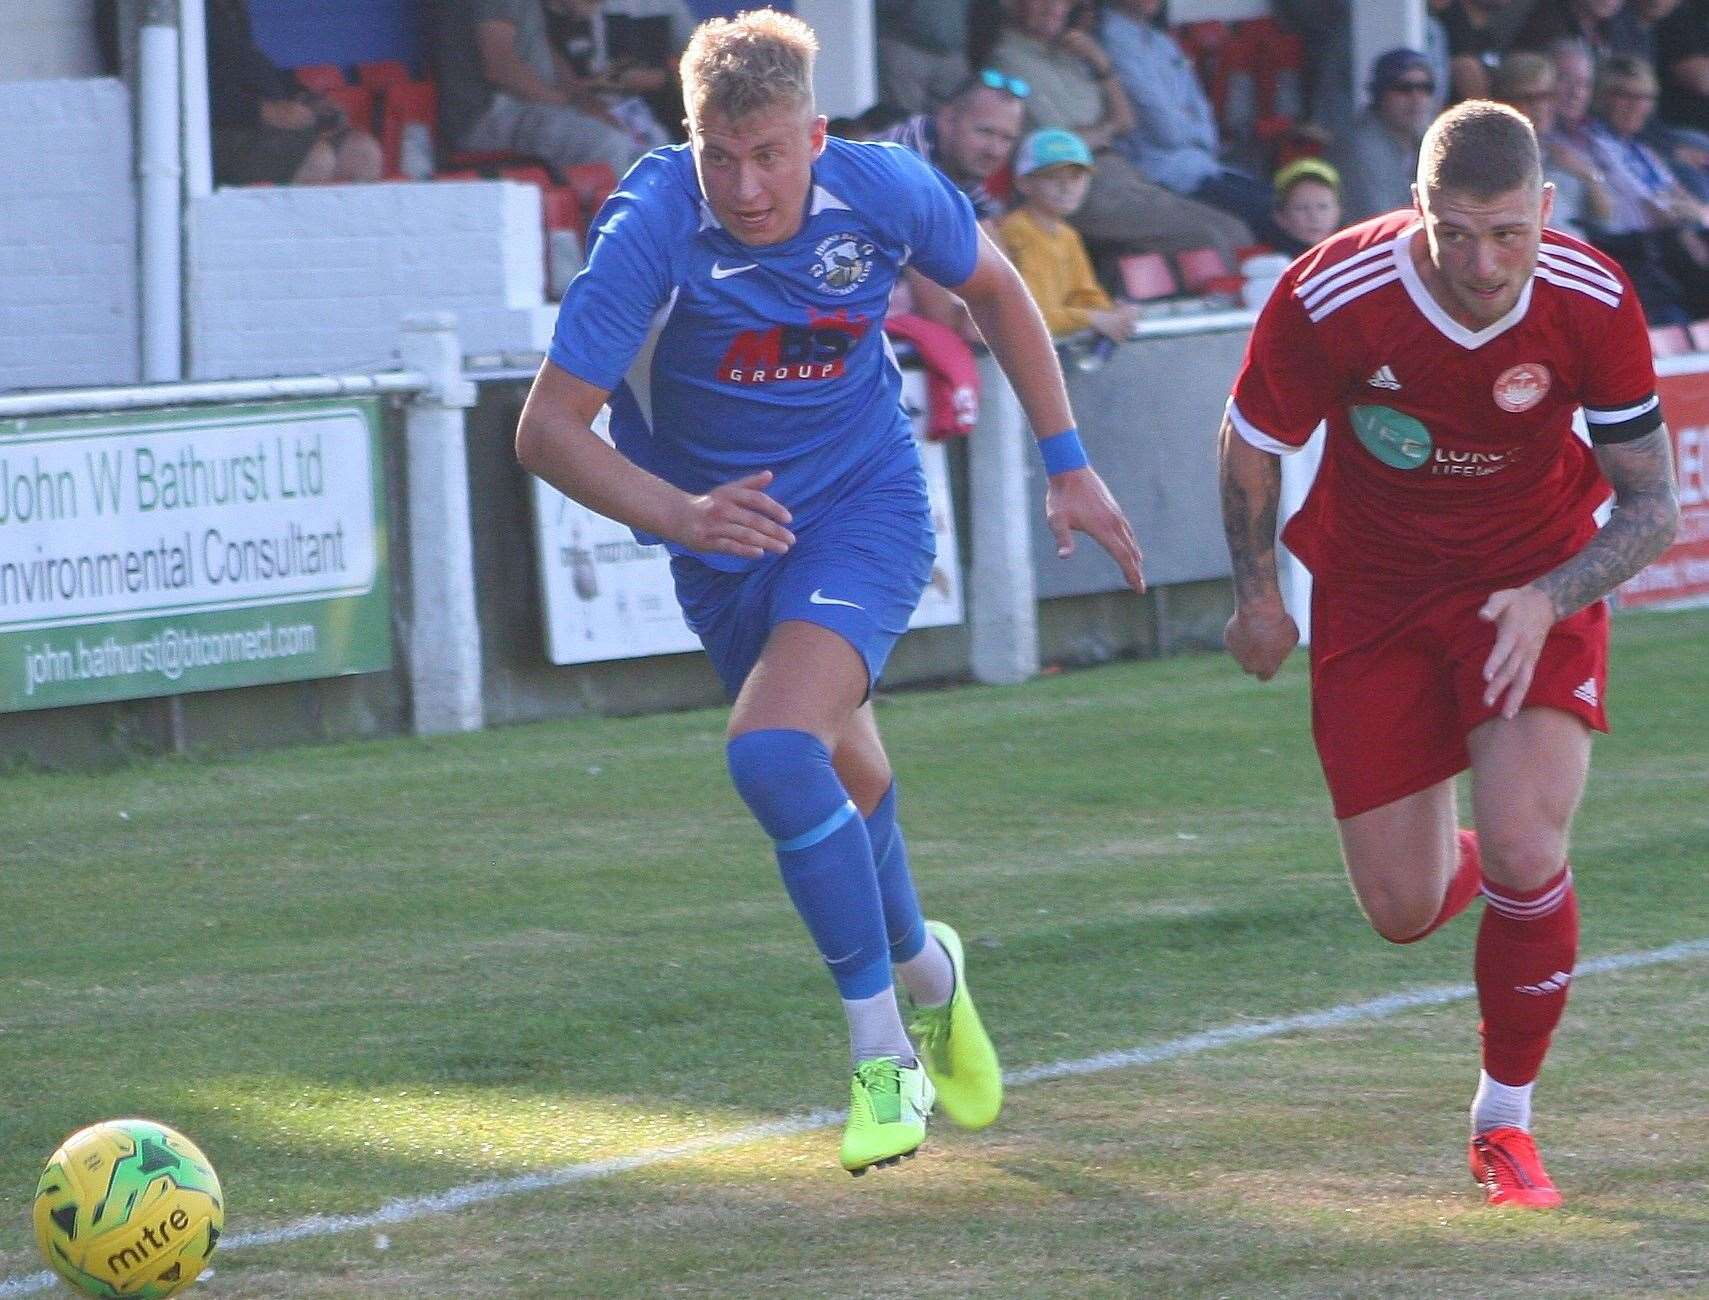 Hythe skipper Charlie Webster pursues Herne Bay's Luke Griffiths at Winch's Field on Saturday Picture: Keith Davy